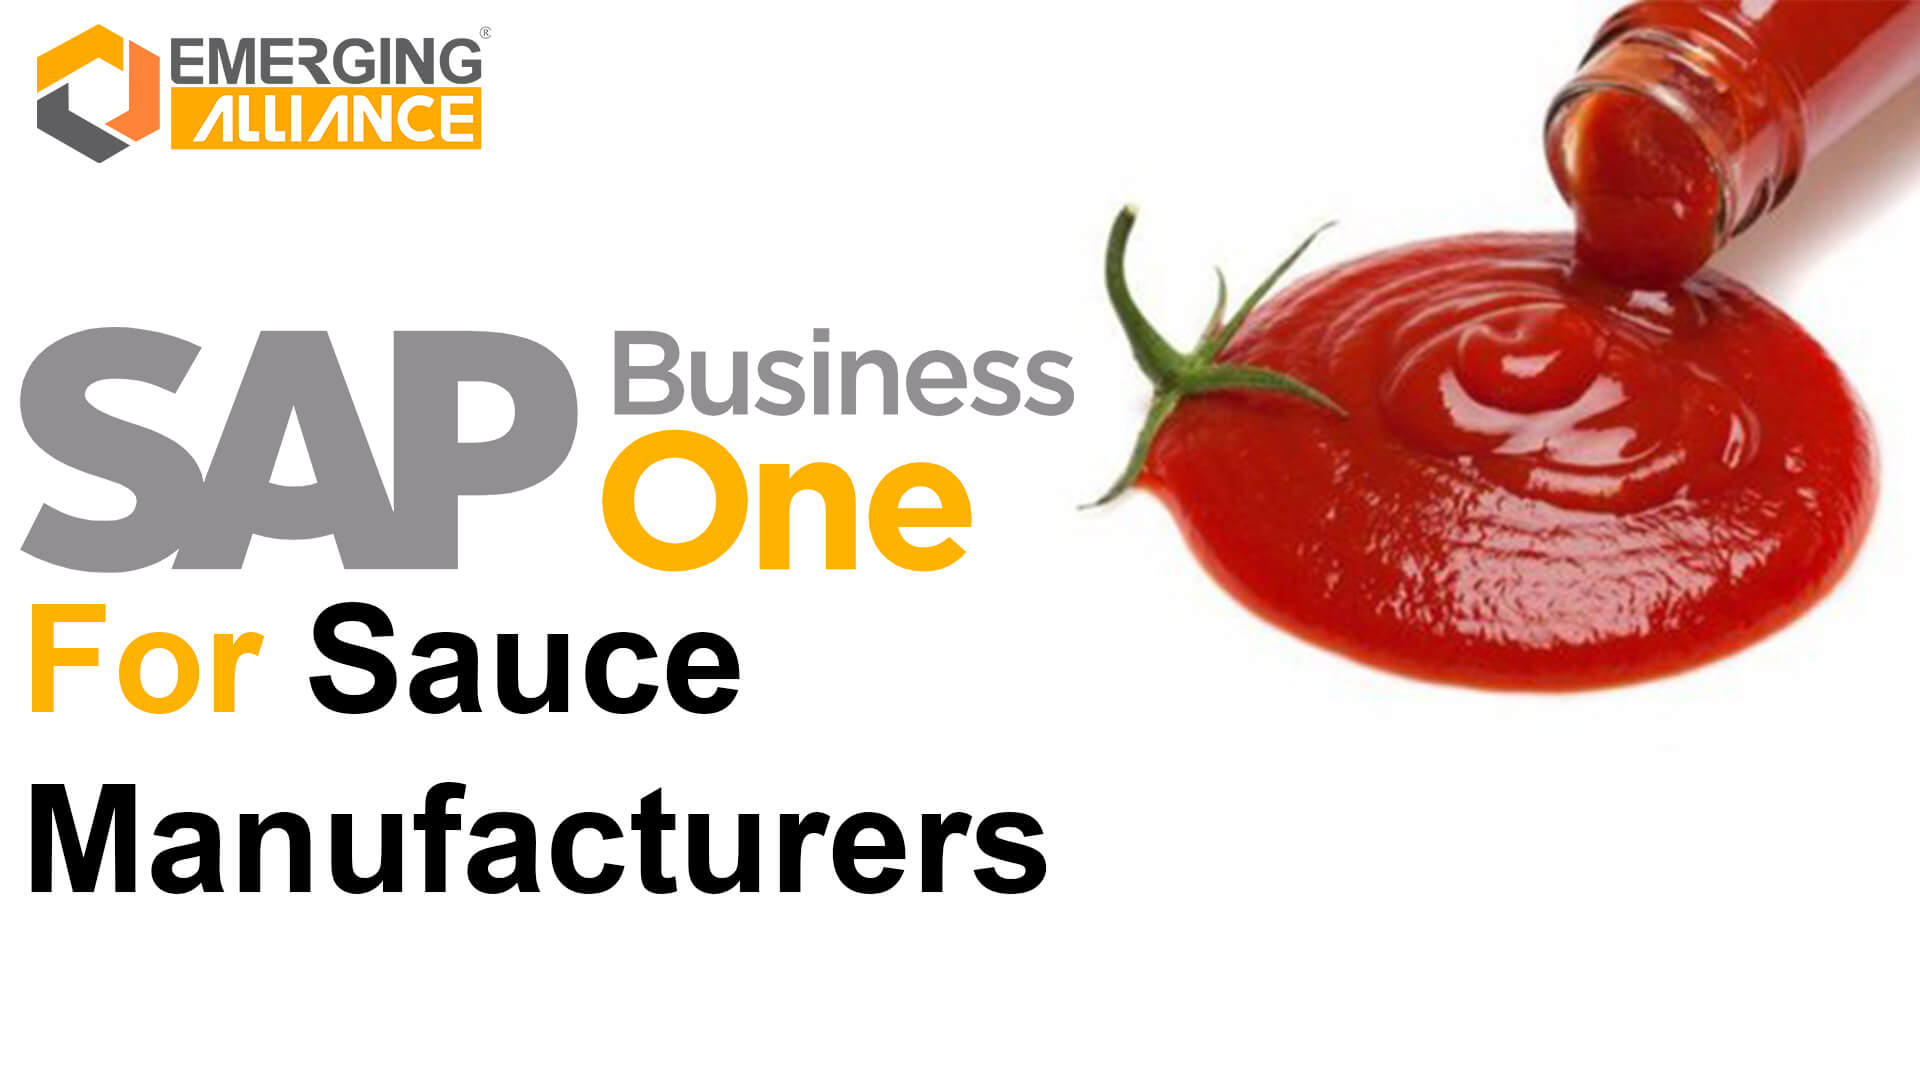 sap business one for sauce manufacturers